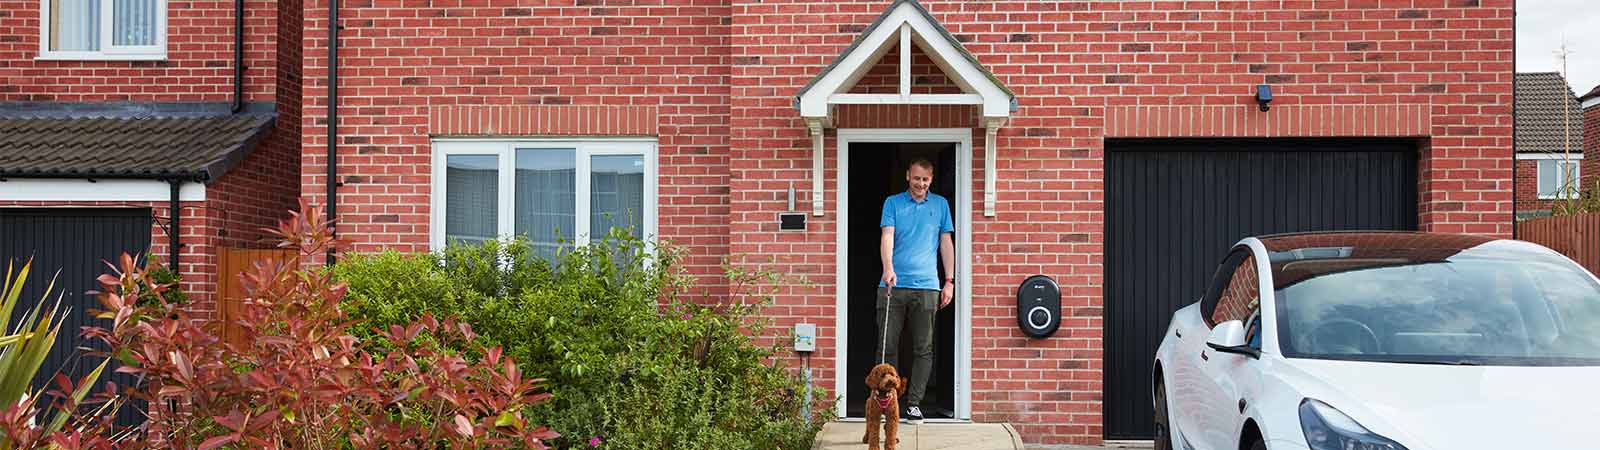 Image of a man at his door with his dog with an EV charger on the front of his house